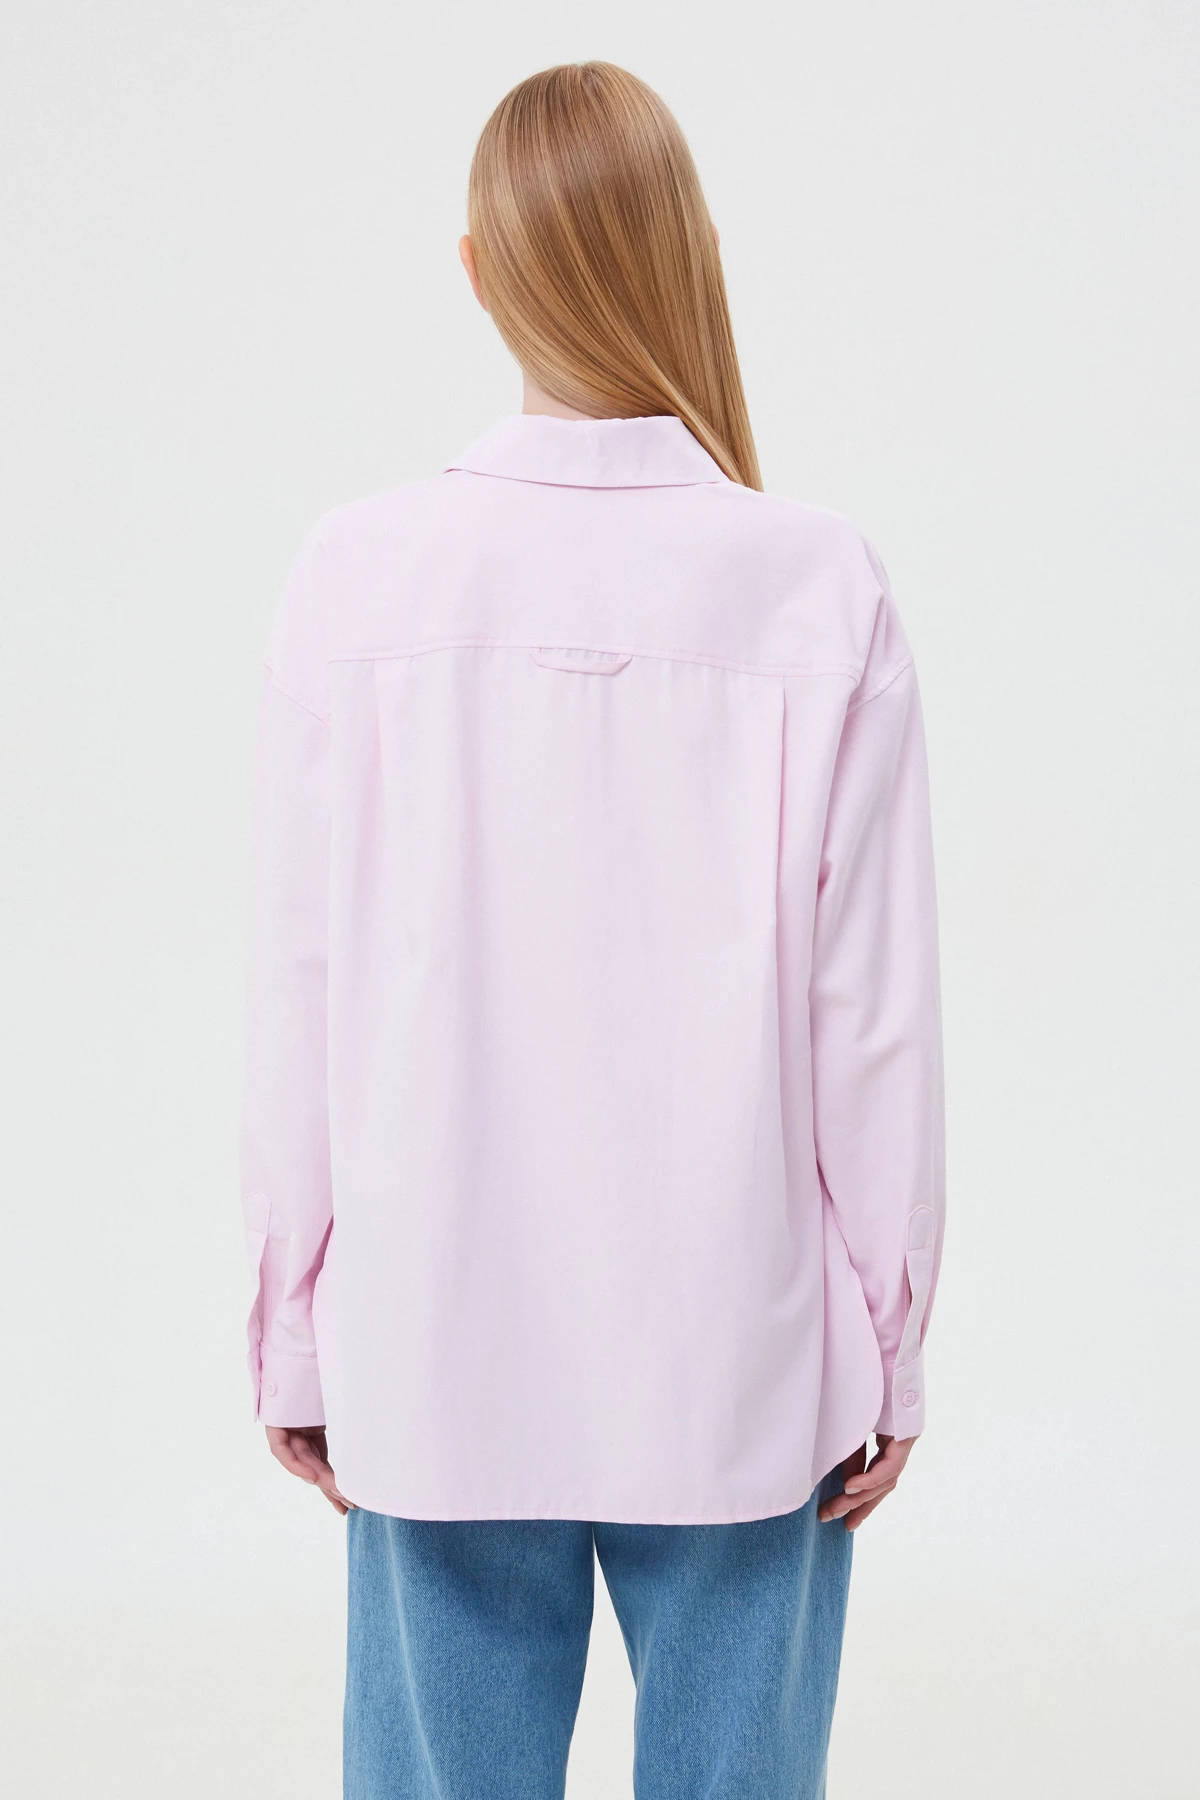 Loose-fit baby pink cotton shirt, photo 3